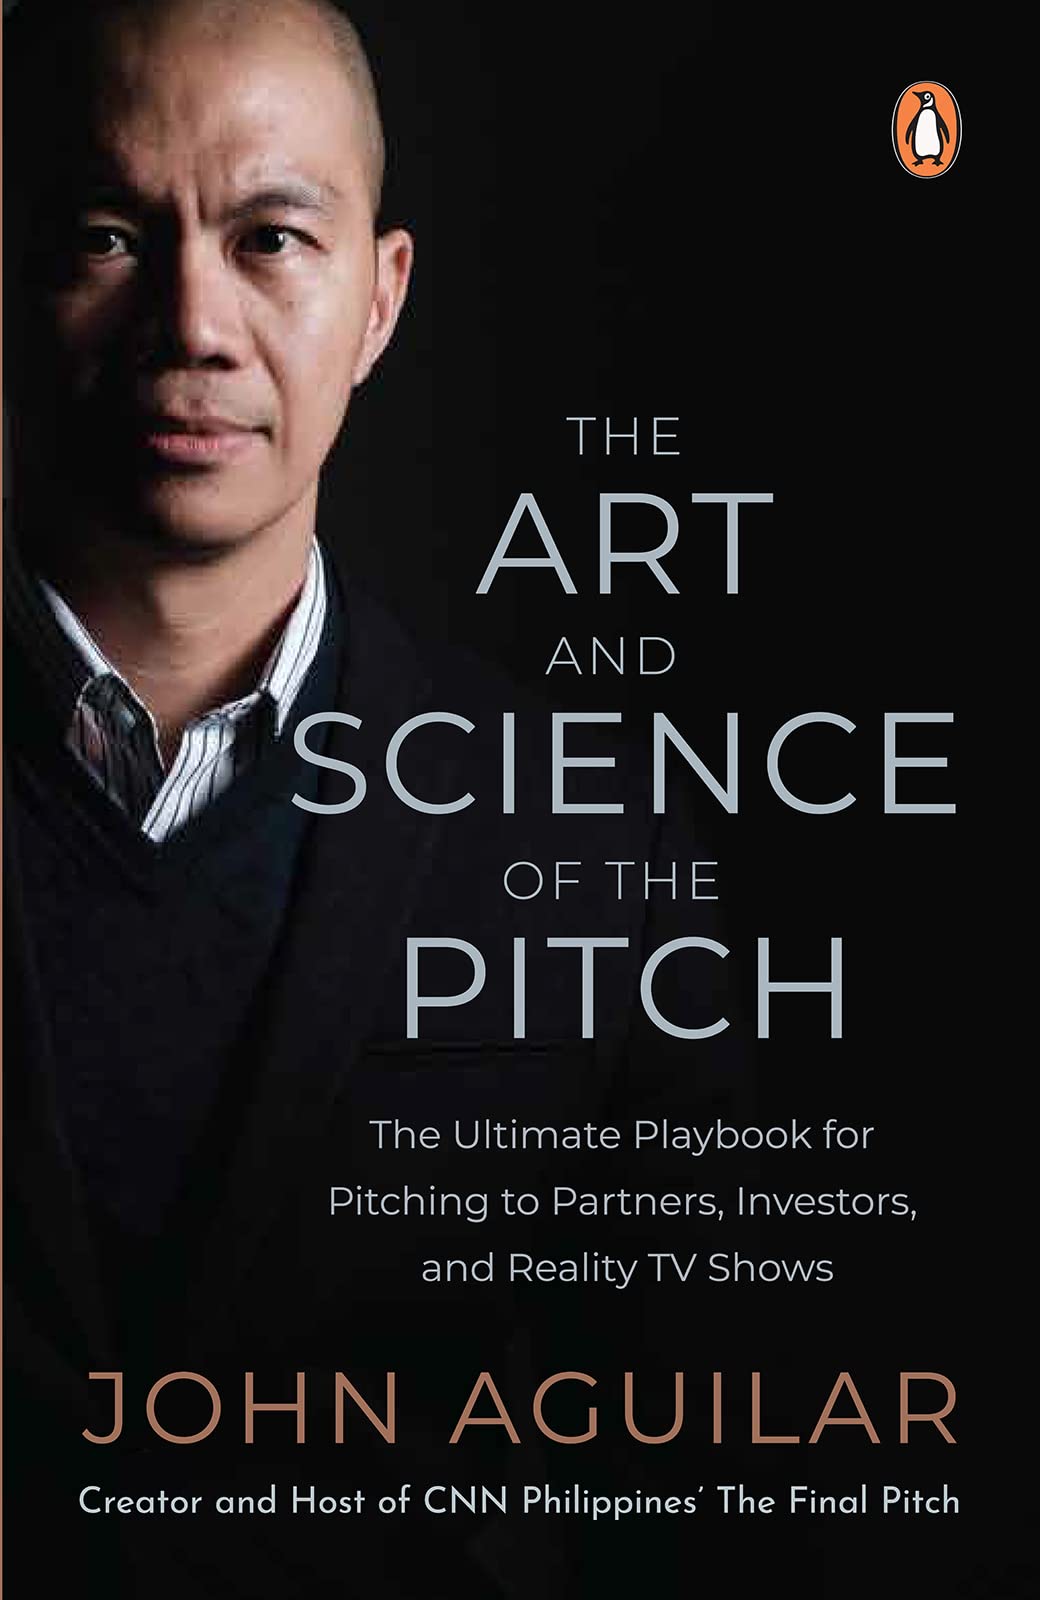 The art and science of the pitch the ultimate playbook for pitching to partners, investors, and reality TV shows